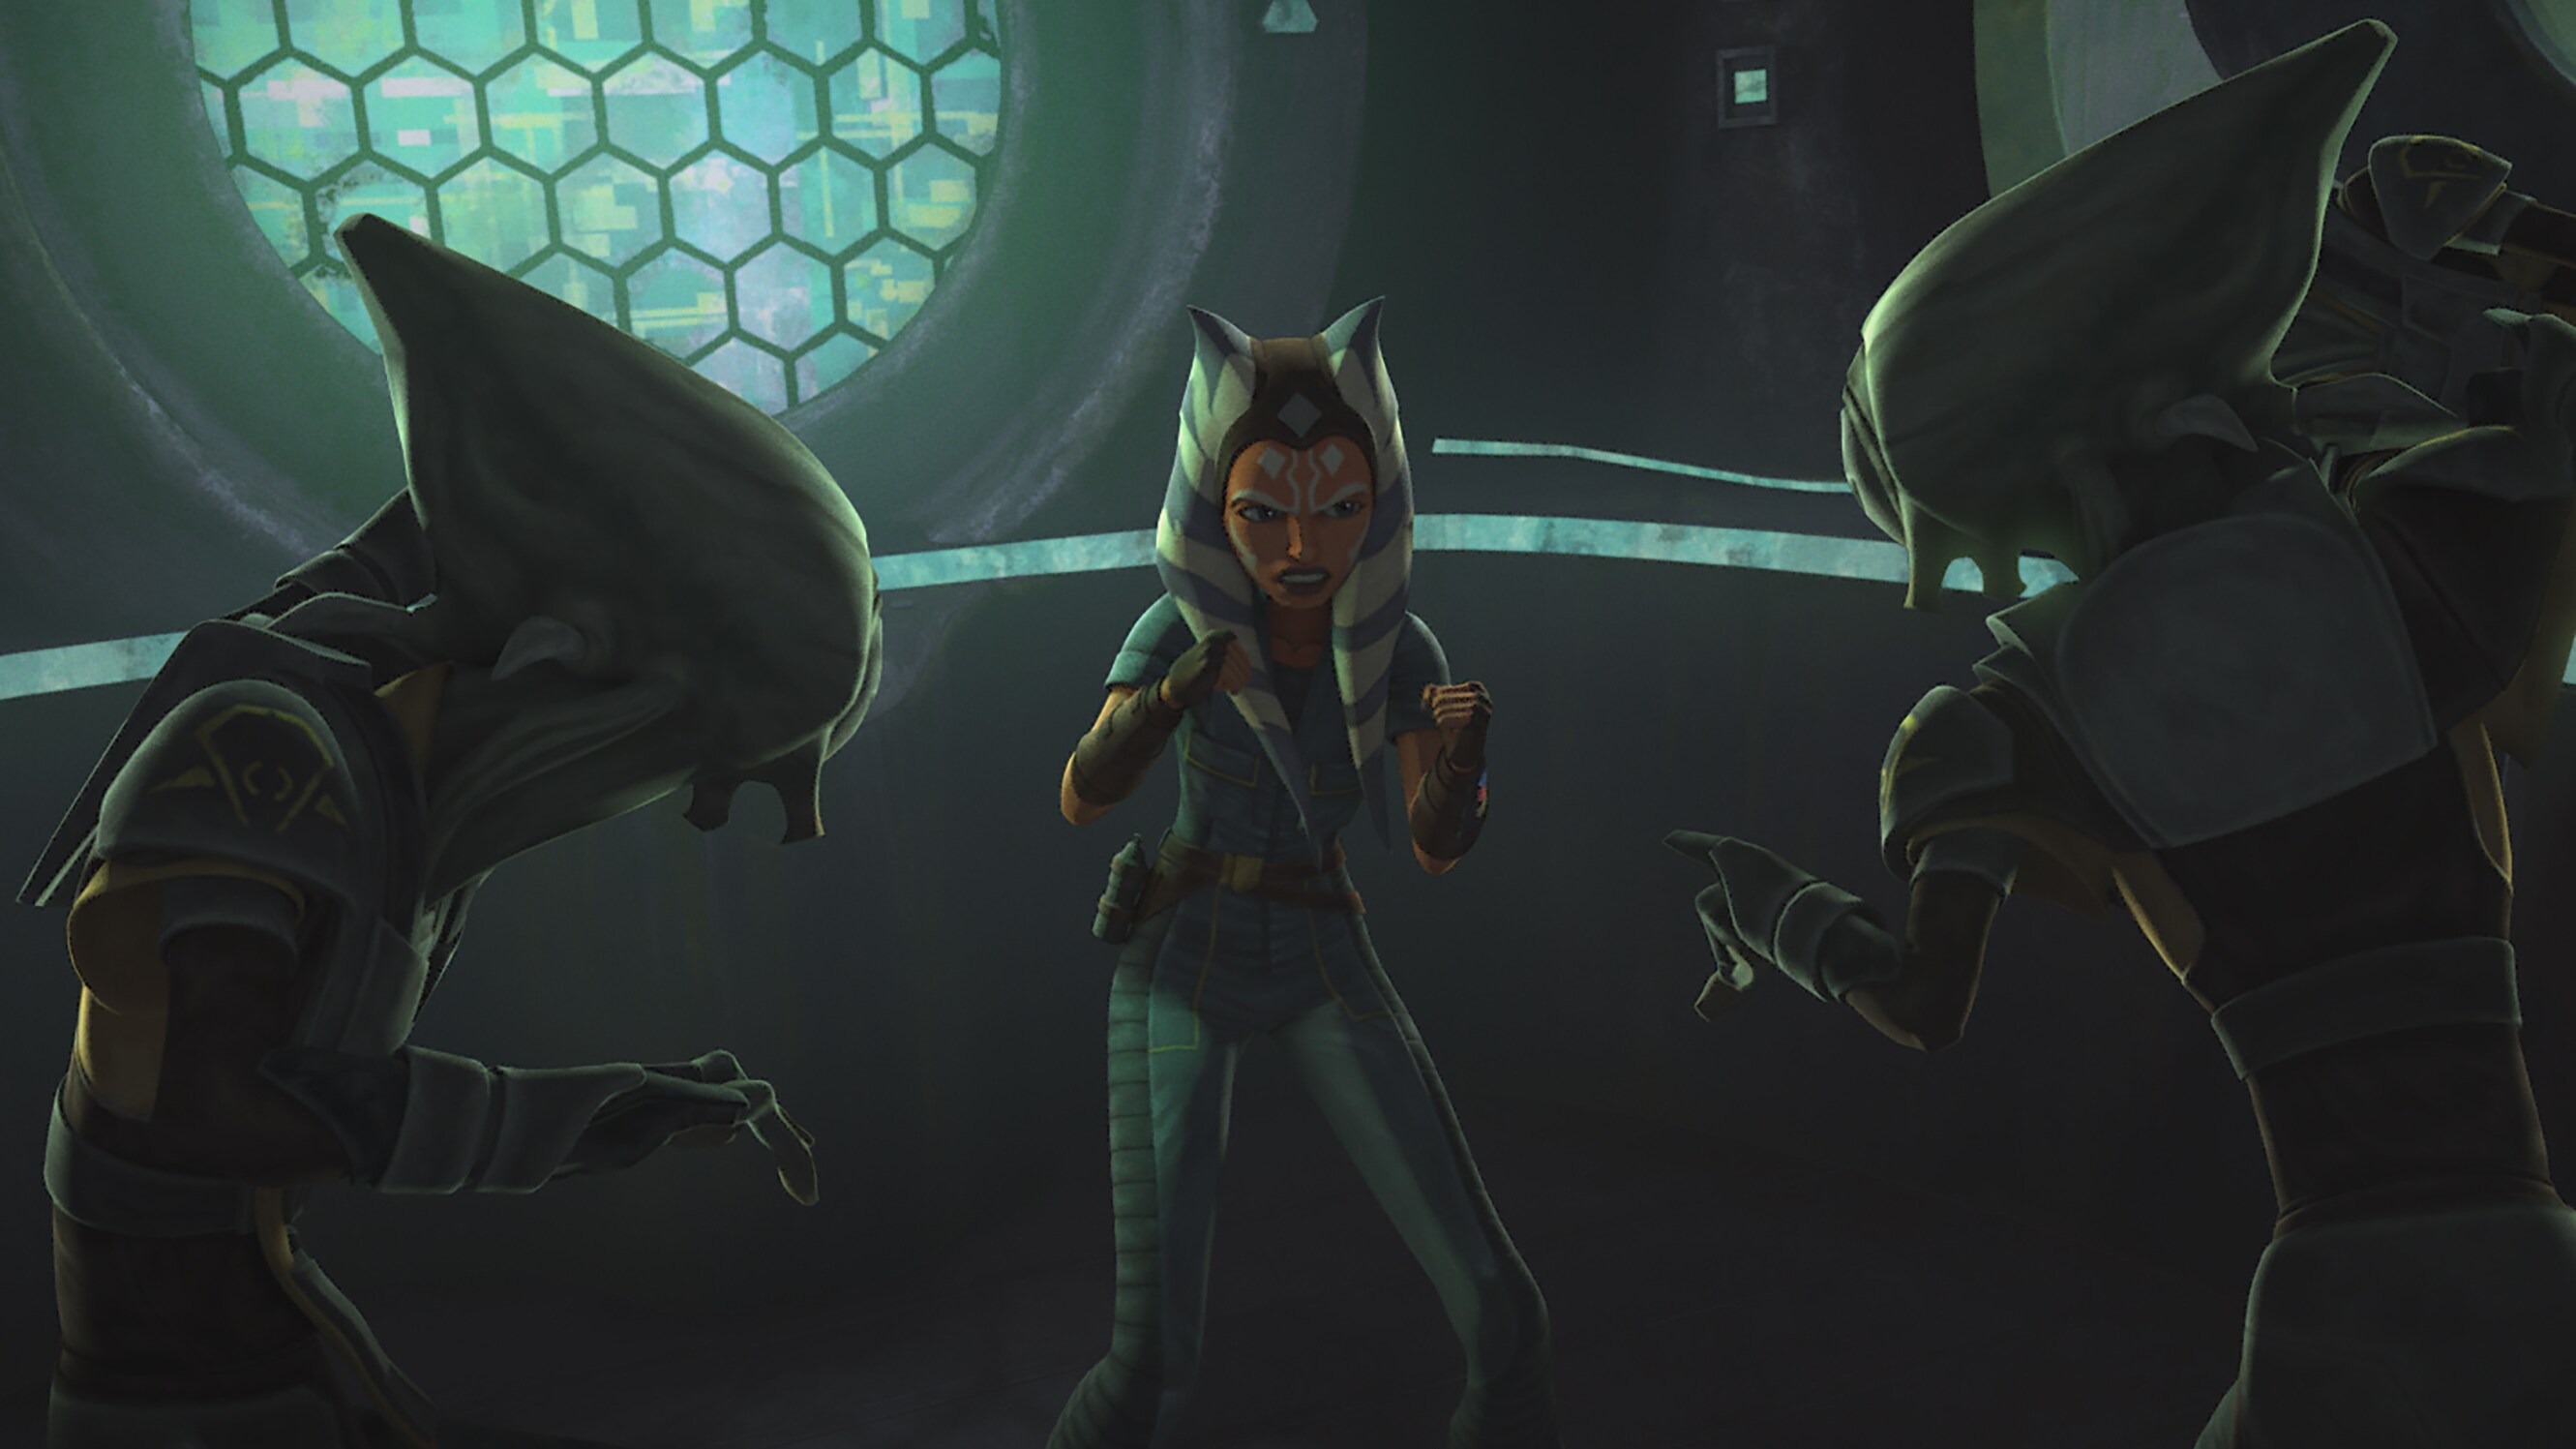 Ahsoka defends herself against the Pykes in STAR WARS: THE CLONE WARS, exclusively on Disney+.